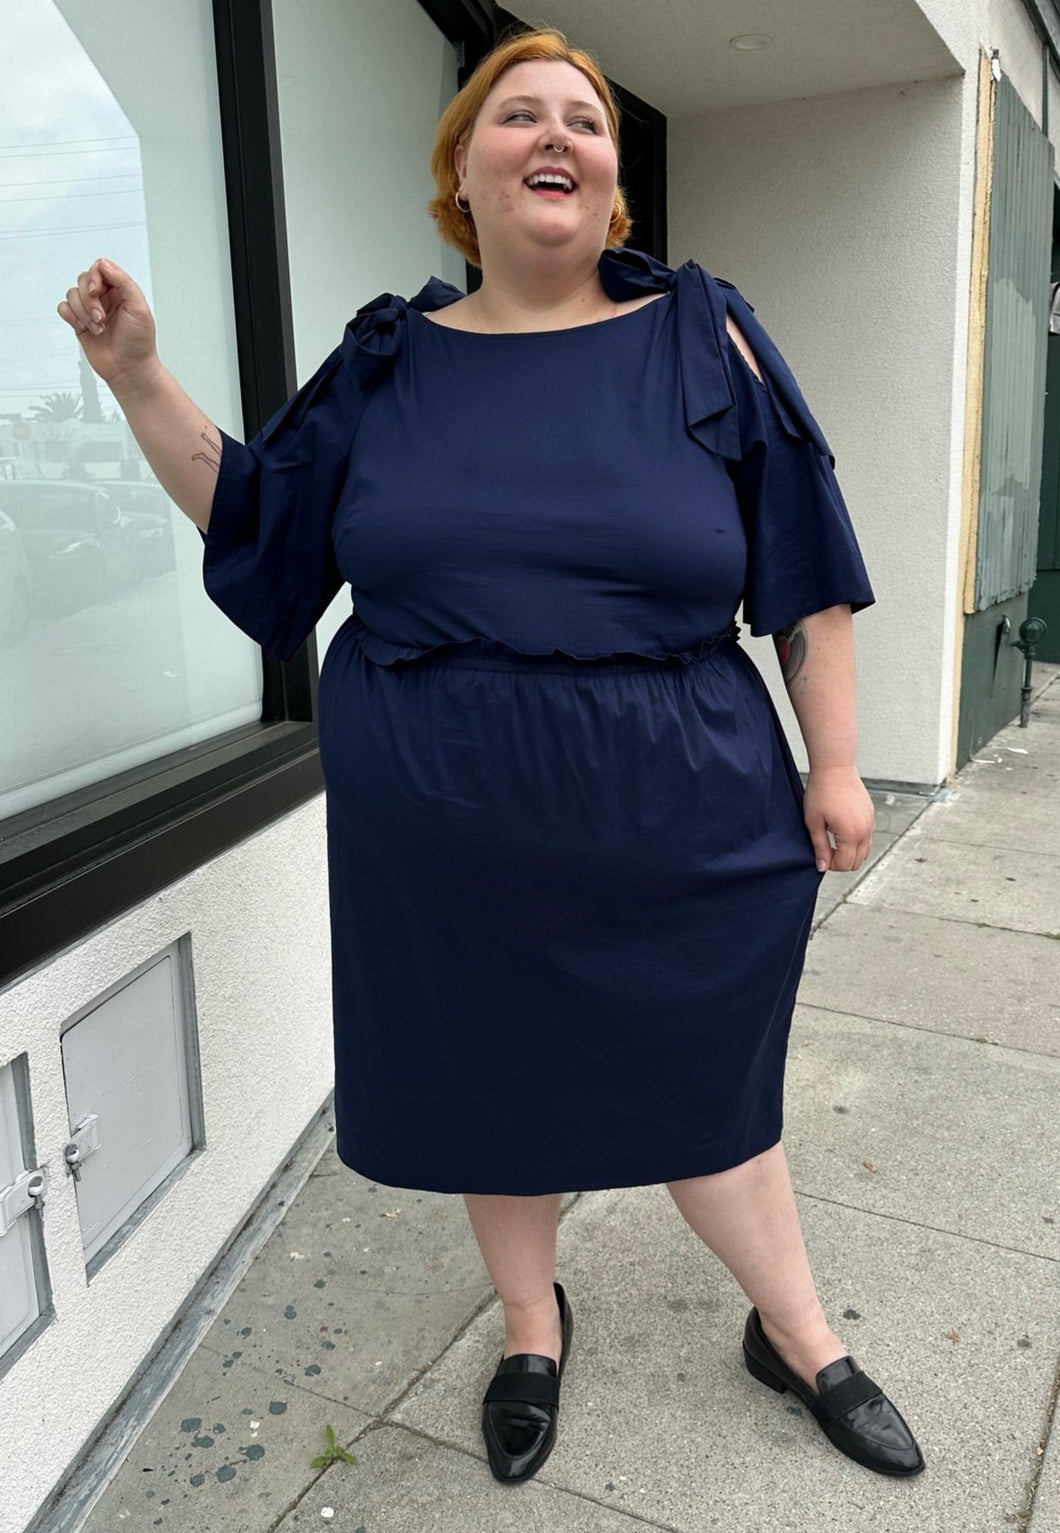 Full-body front view of a size 22 Eloquii navy blue midi dress with ruffle details and tie-detail cold shoulders styled with black slides on a size 22/24 model. The photo is taken outside in natural lighting.